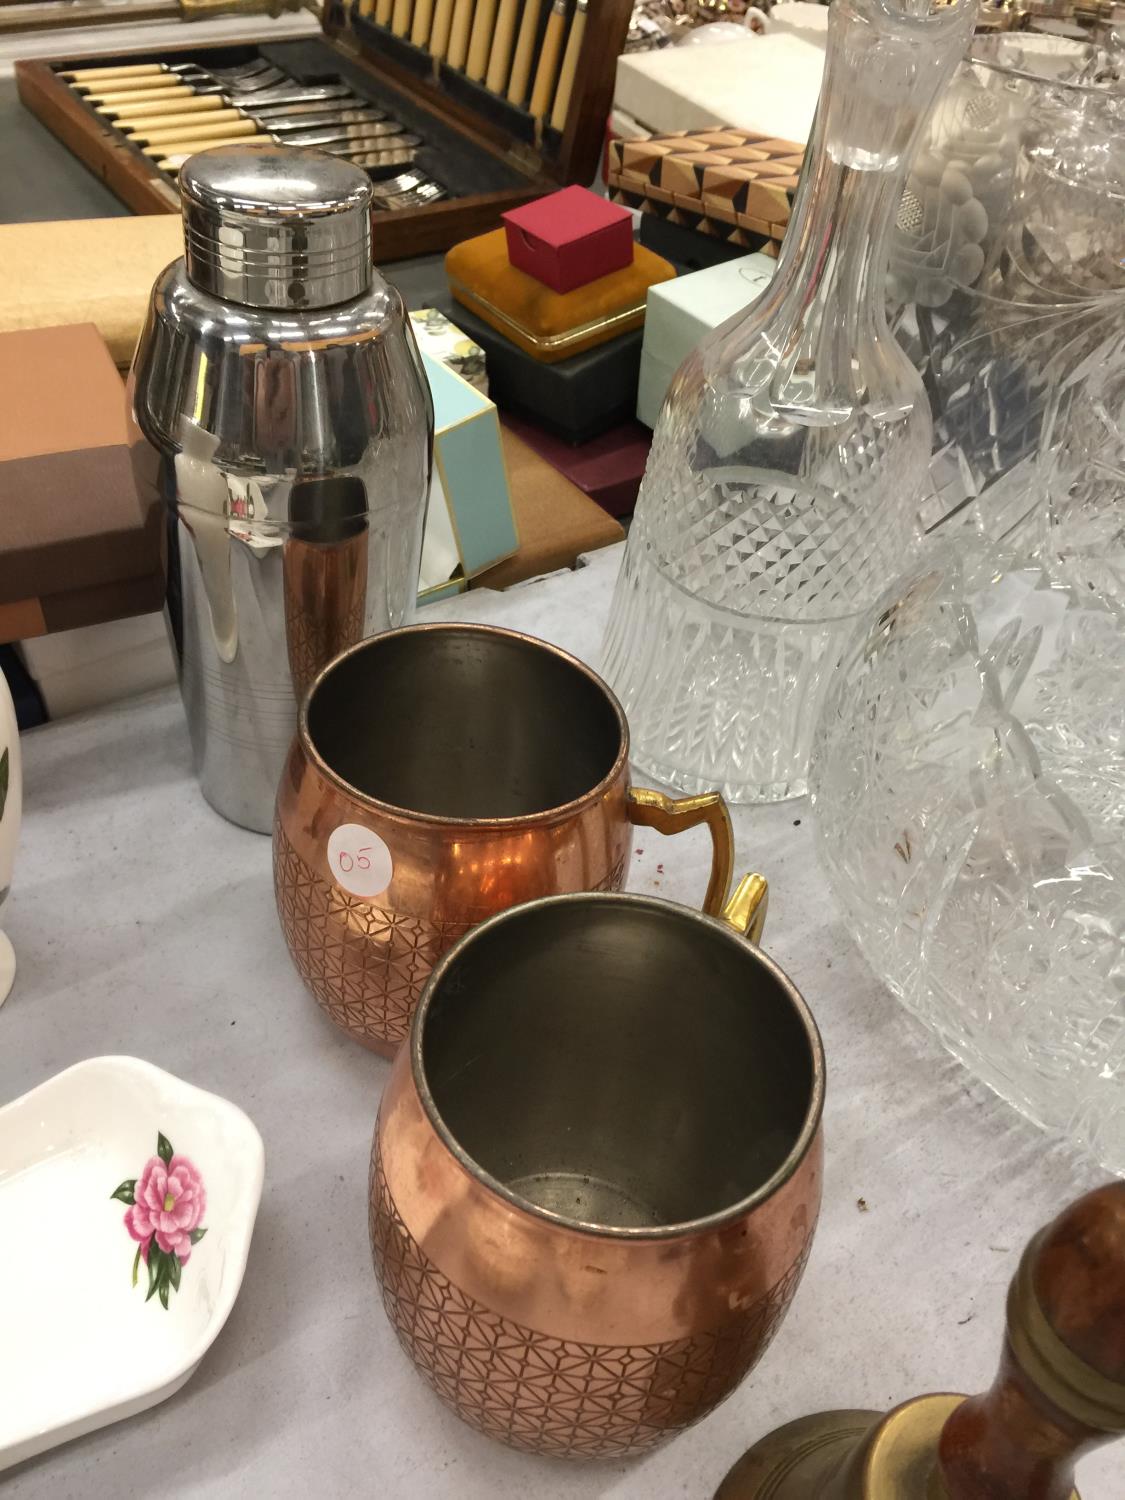 TWO BRASS BELL, TWO COPPER MUGS AND A VINTAGE STYLE COCKTAIL SHAKER - Image 6 of 6